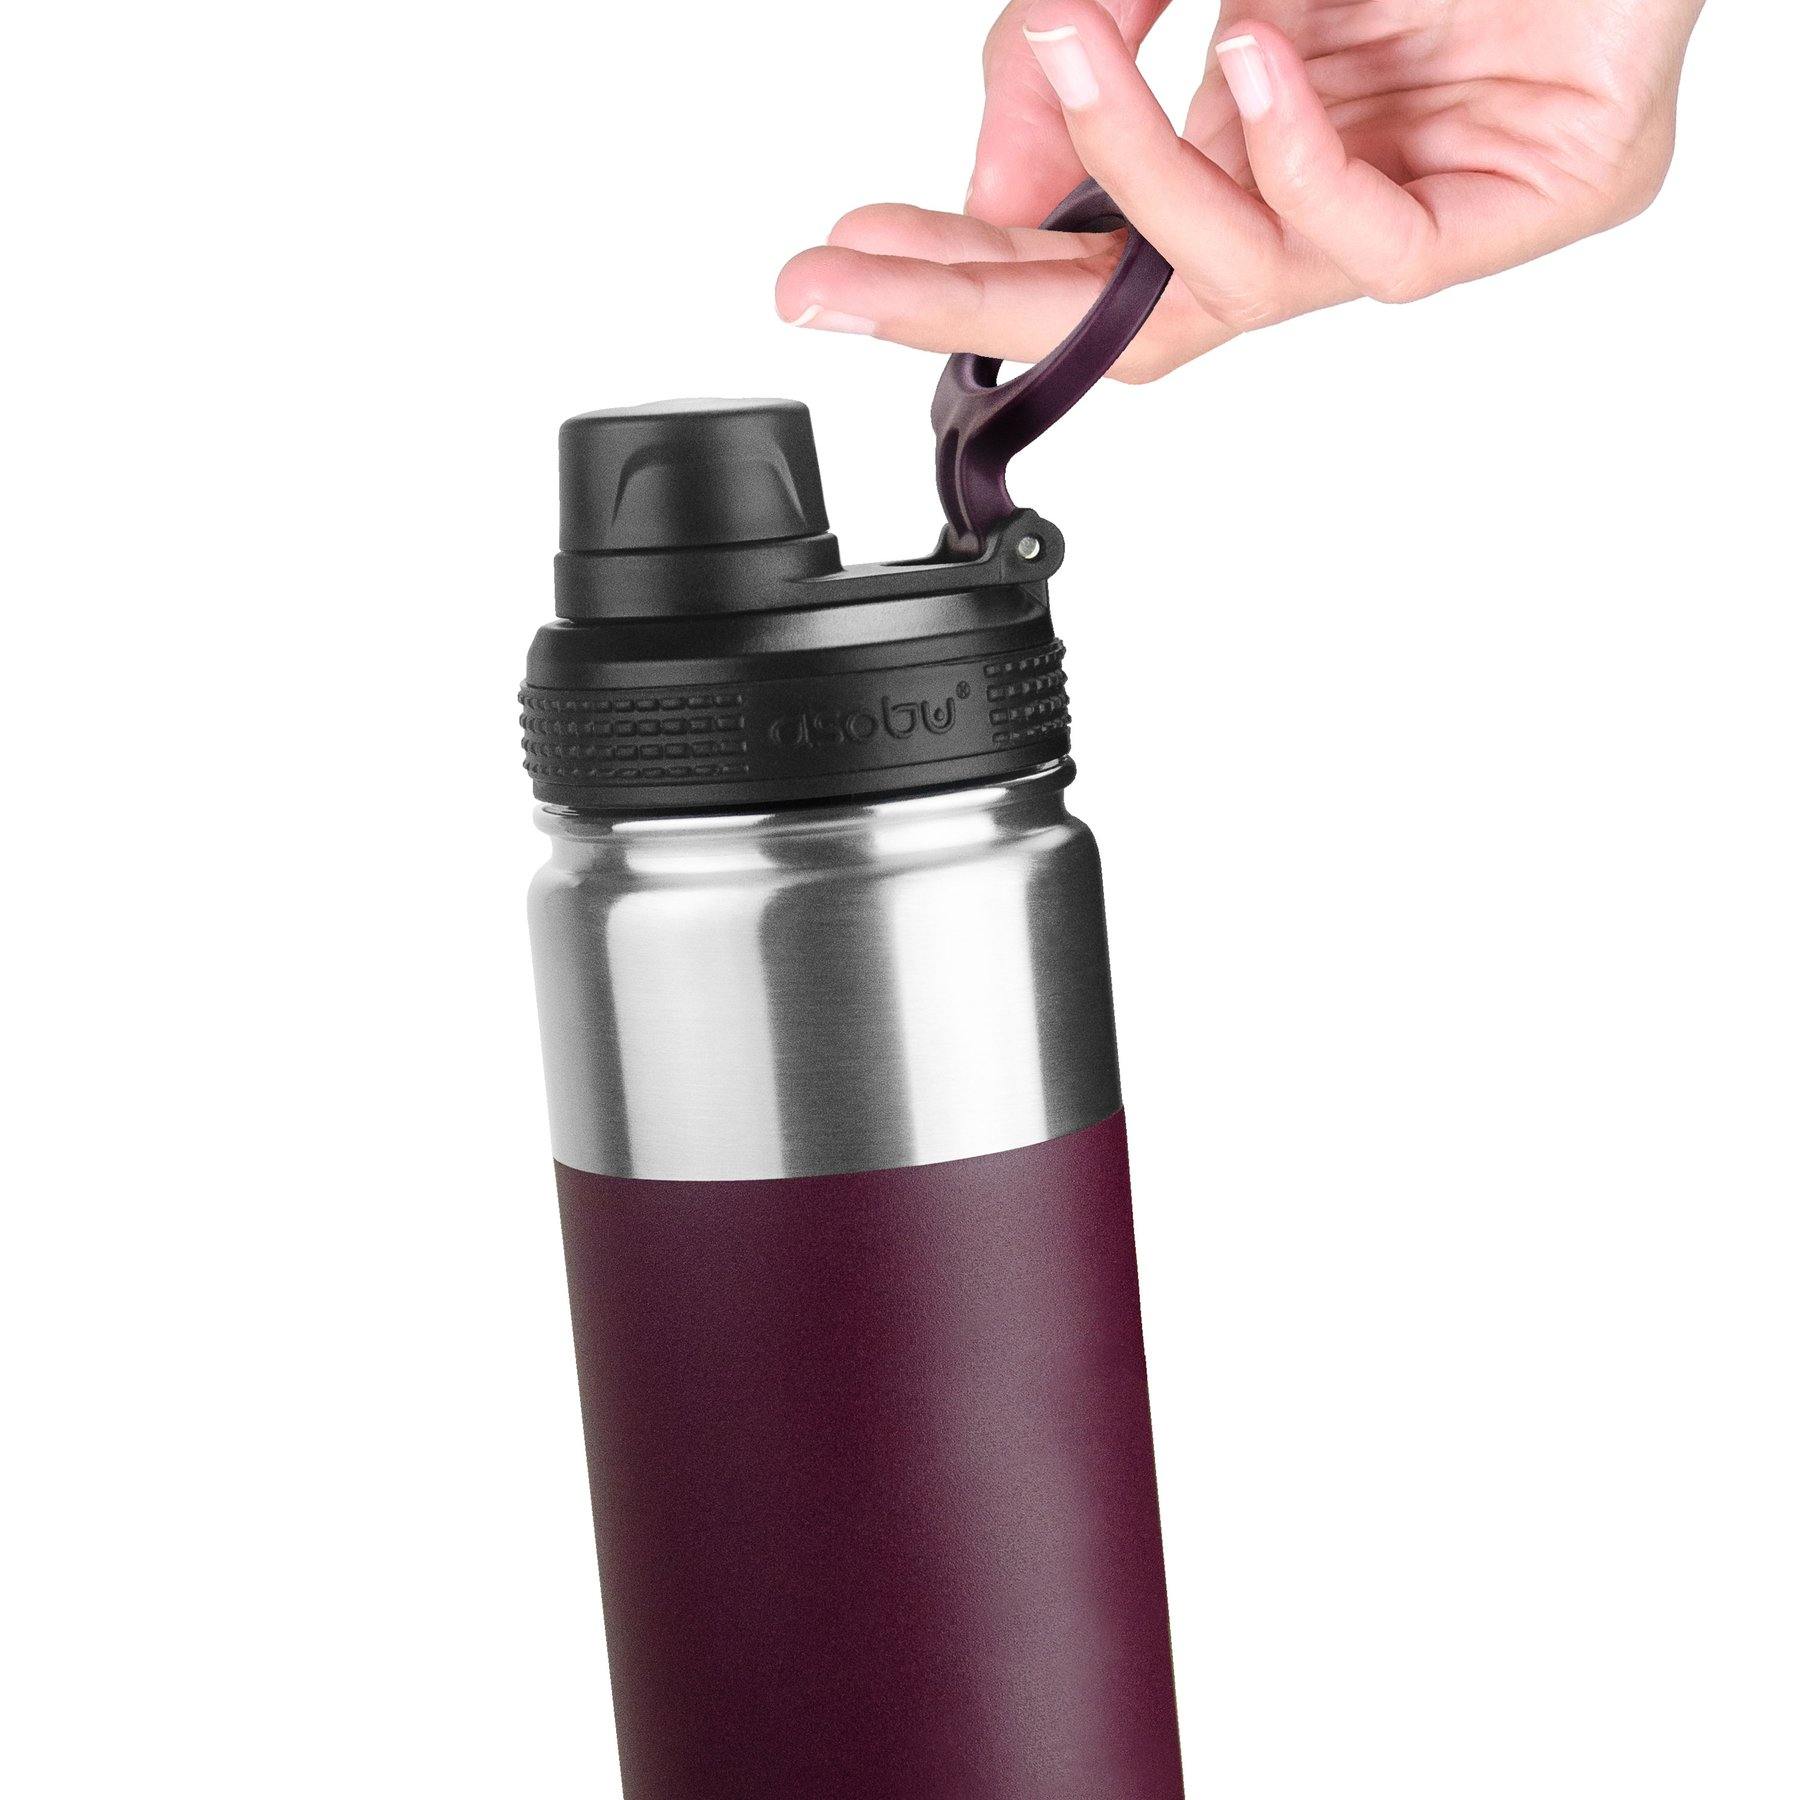 Asobu | Alpine Flask Thermos - Insulated & Double Walled - 18 oz, Thermos, Asobu, Defiance Outdoor Gear Co.